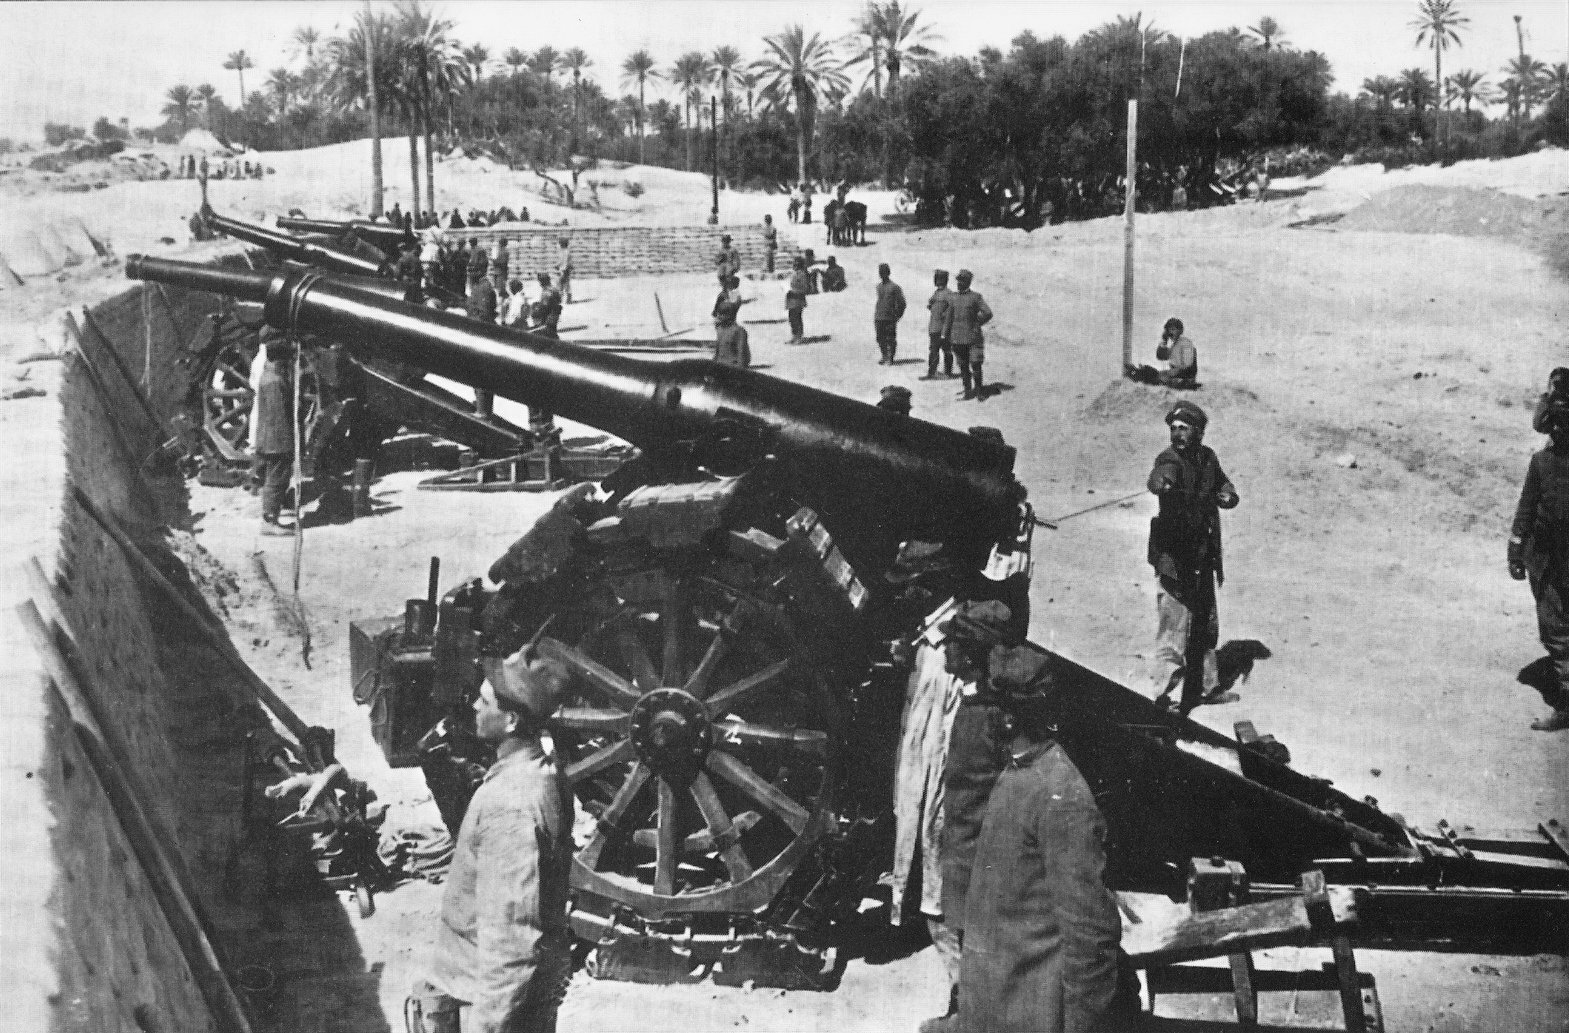 A historical photograph from the Italo-Turkish War in 1911, showcasing an Italian artillery battery positioned near Tripoli. The massive cannon, supported by large wheels and mechanisms, is prominent in the foreground. Soldiers in period uniforms are dispersed around the area, with some attending to the artillery, while others stand or move about, conducting various duties. The background is dotted with palm trees and sparse structures.